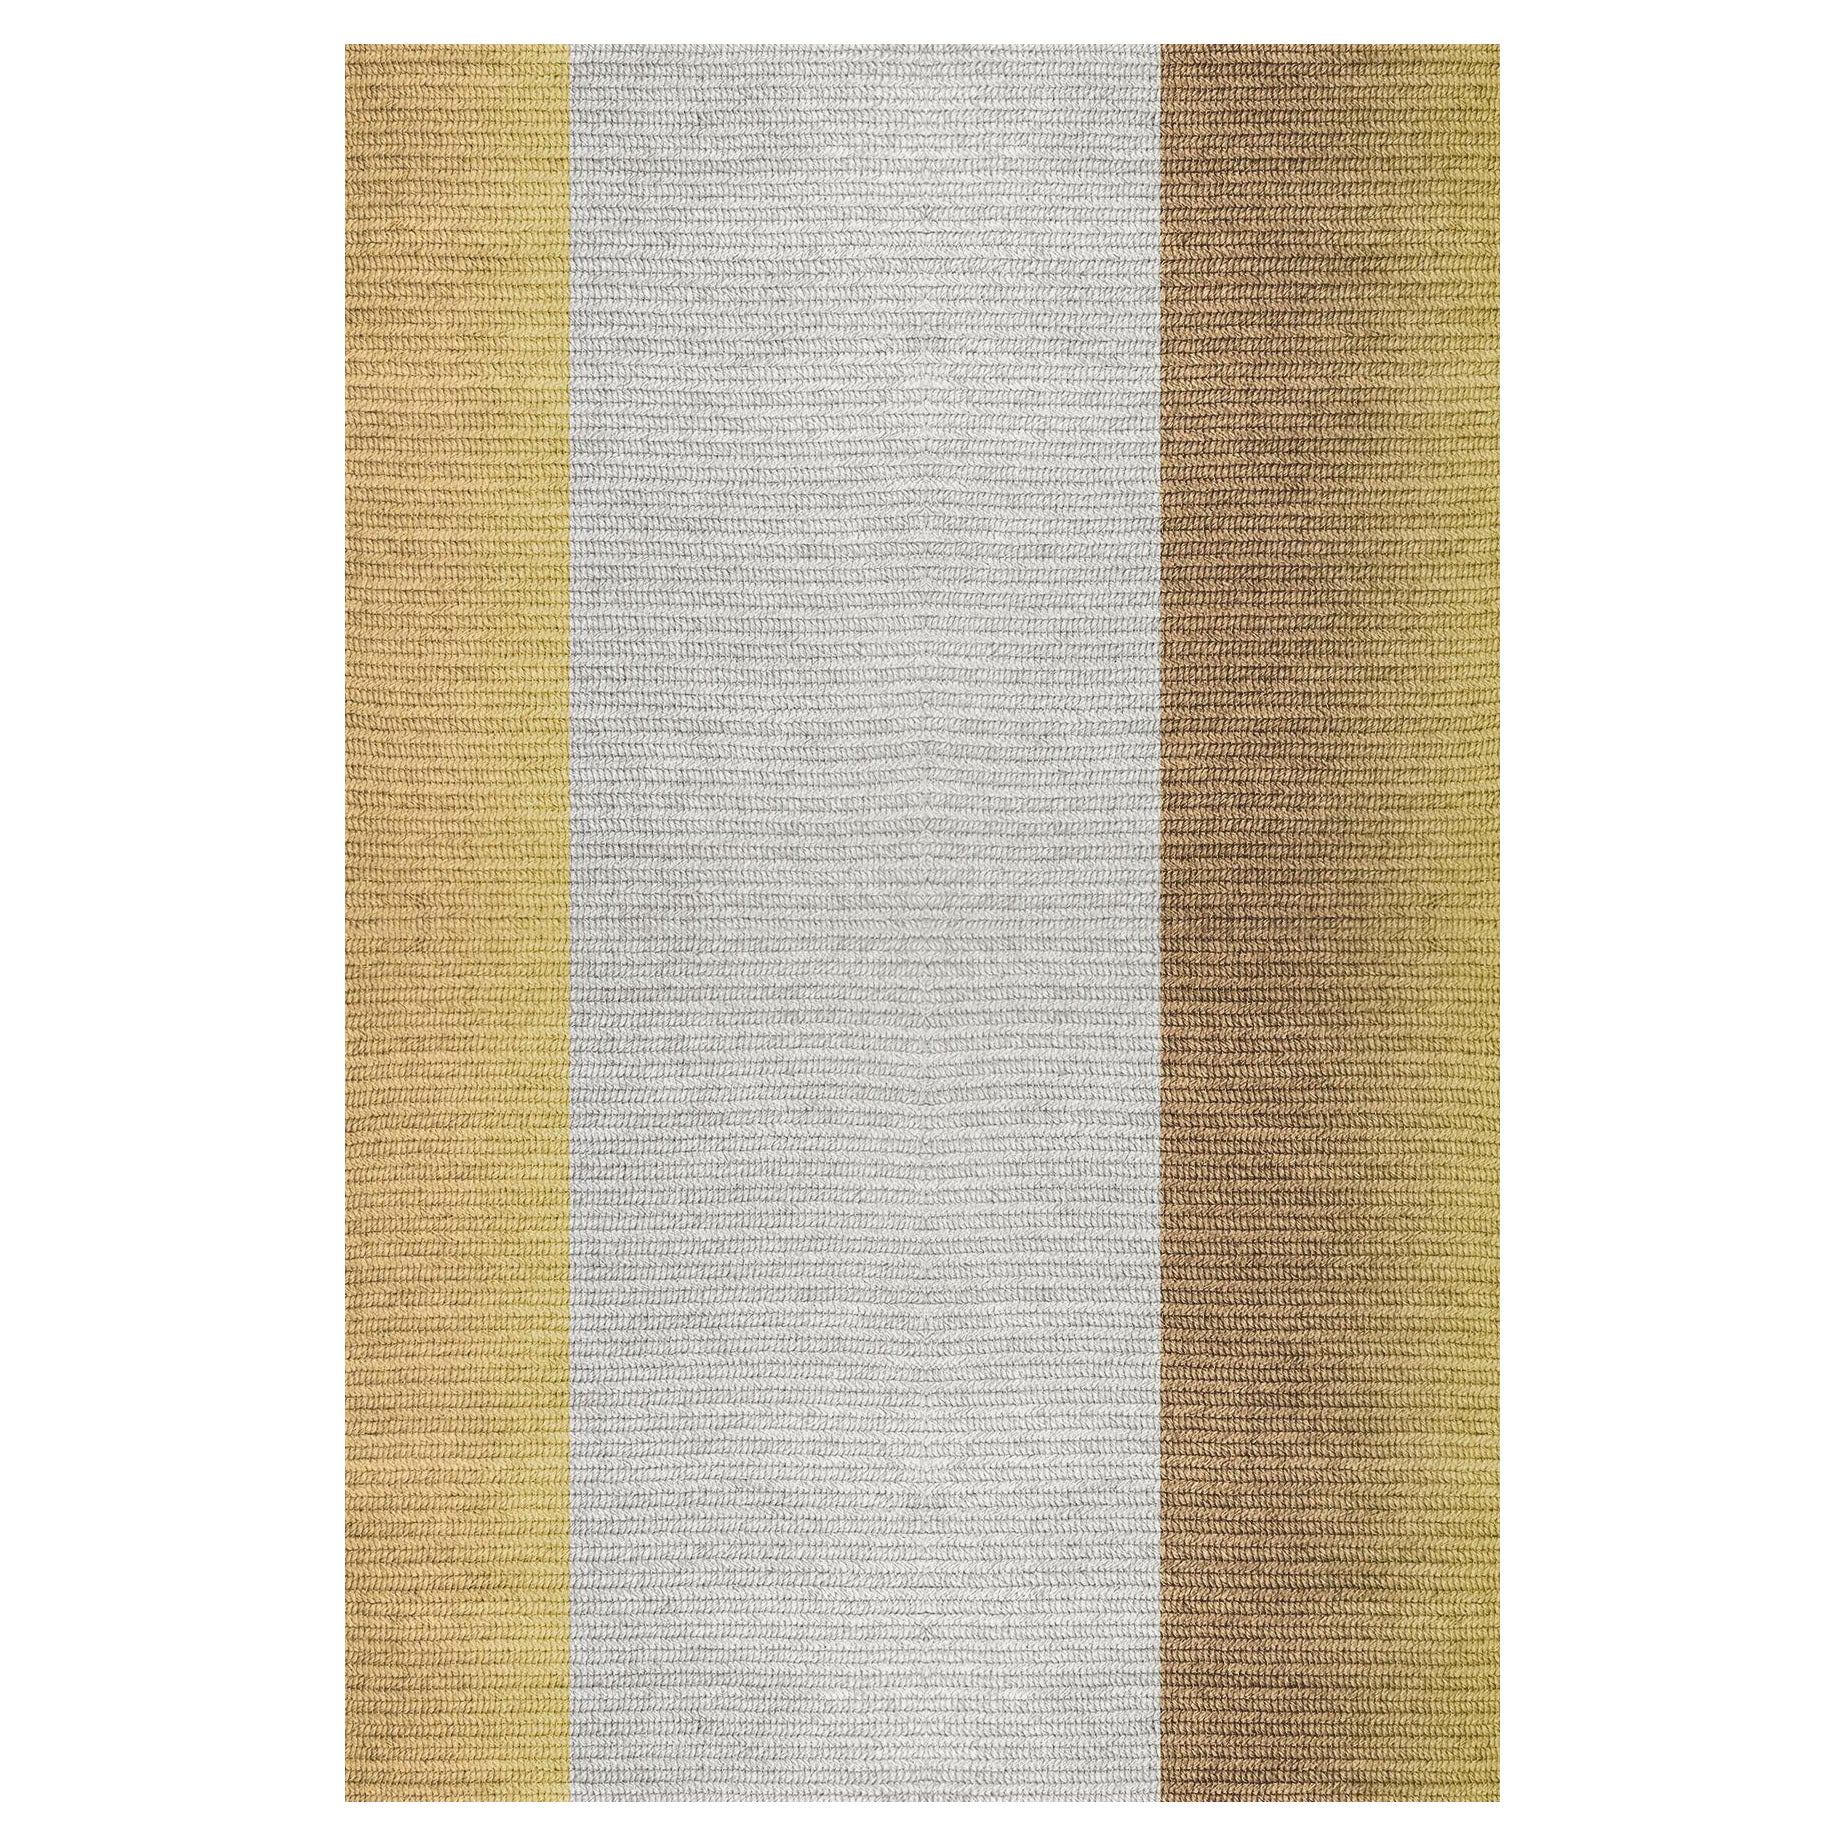 'Blur' Rug in Abaca, Colour 'Pampas' 160x240cm by Claire Vos for Musett Design